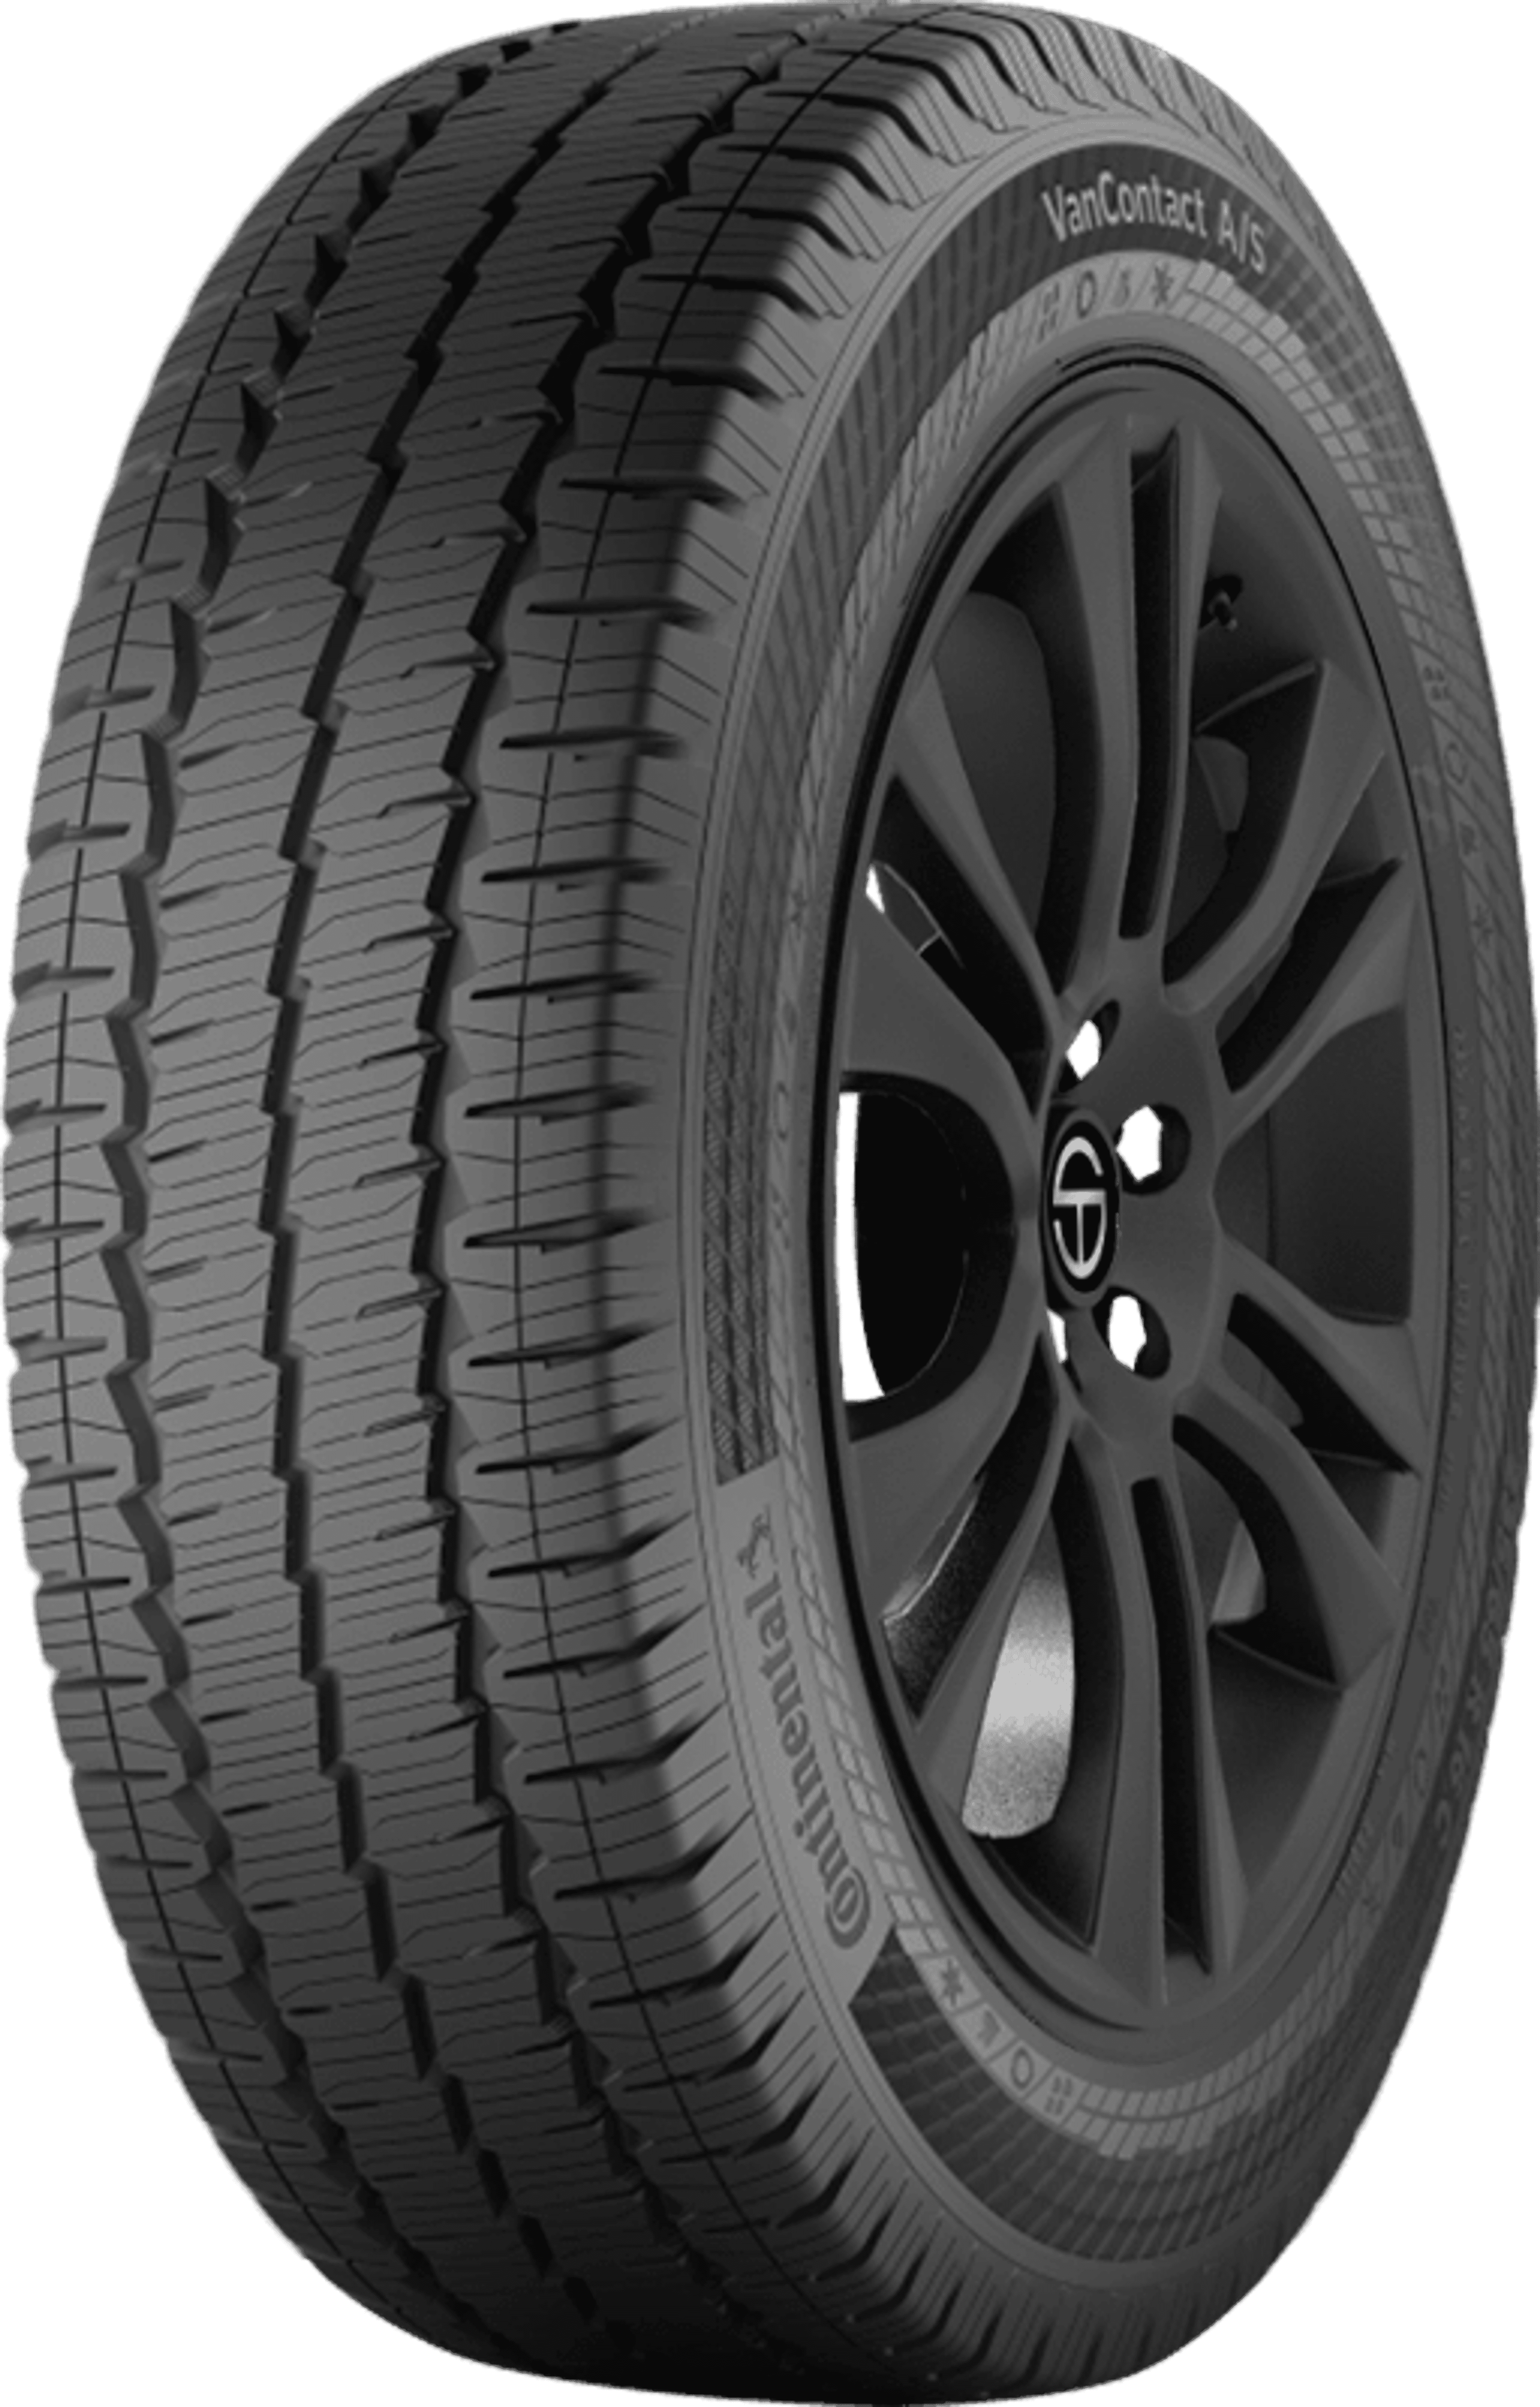 Buy Continental Vancontact A/S Online | Tires SimpleTire